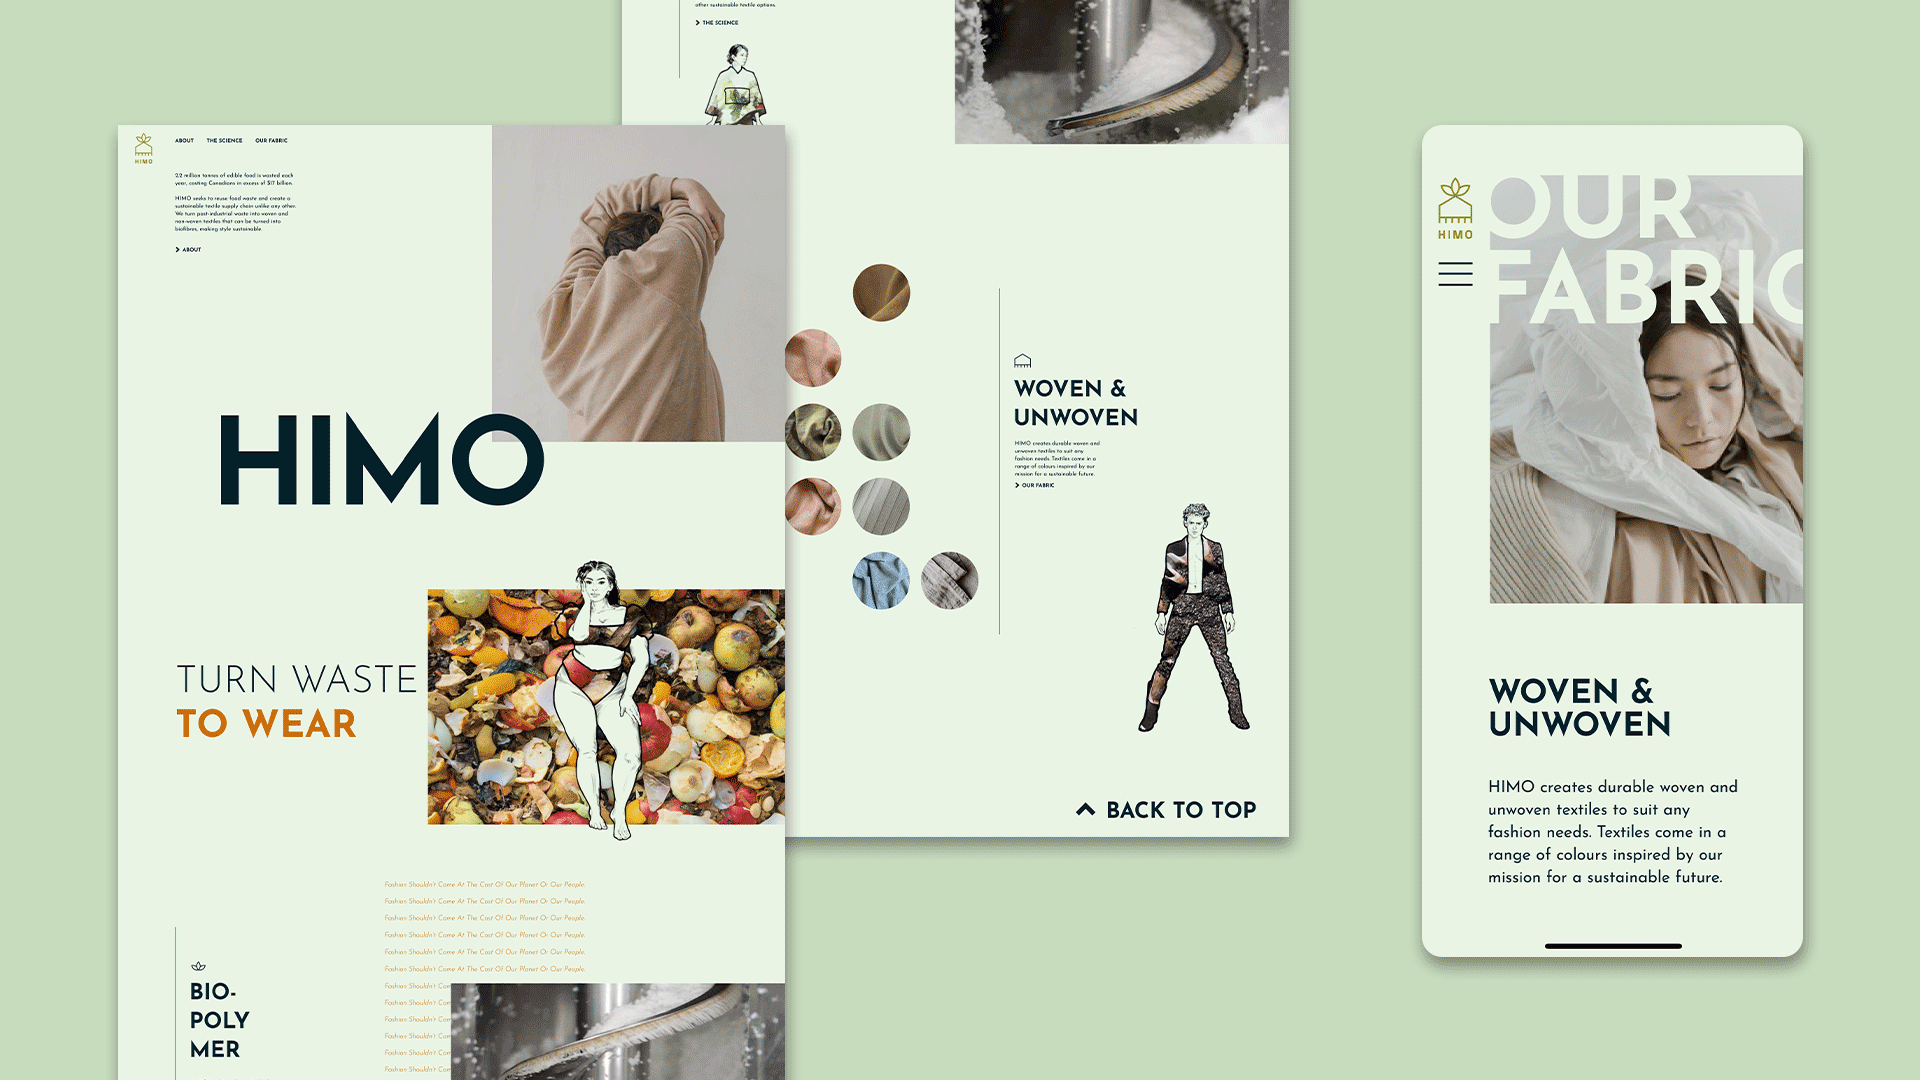 On the left and center is HIMO’s desktop landing page shown through two overlapping vertical panels and on the right is an animated mobile screen changing between the about page and the fabric page against a pale green background.